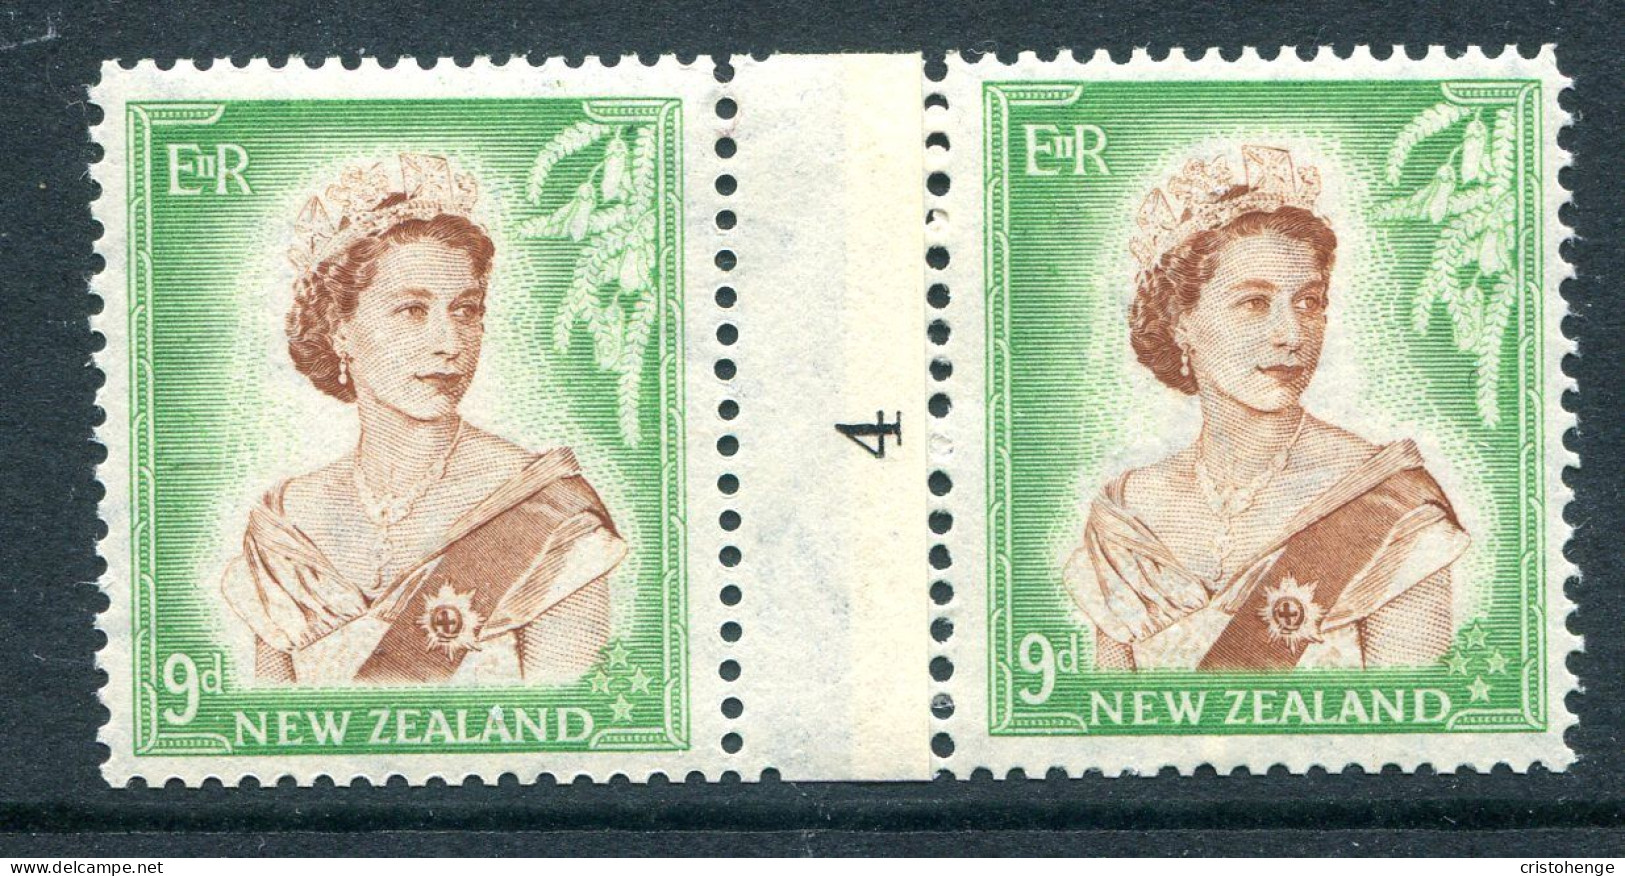 New Zealand 1953-59 QEII Definitives - Coil Pairs - 9d Brown & Green - Horizontal - No. 4 - LHM - Unused Stamps